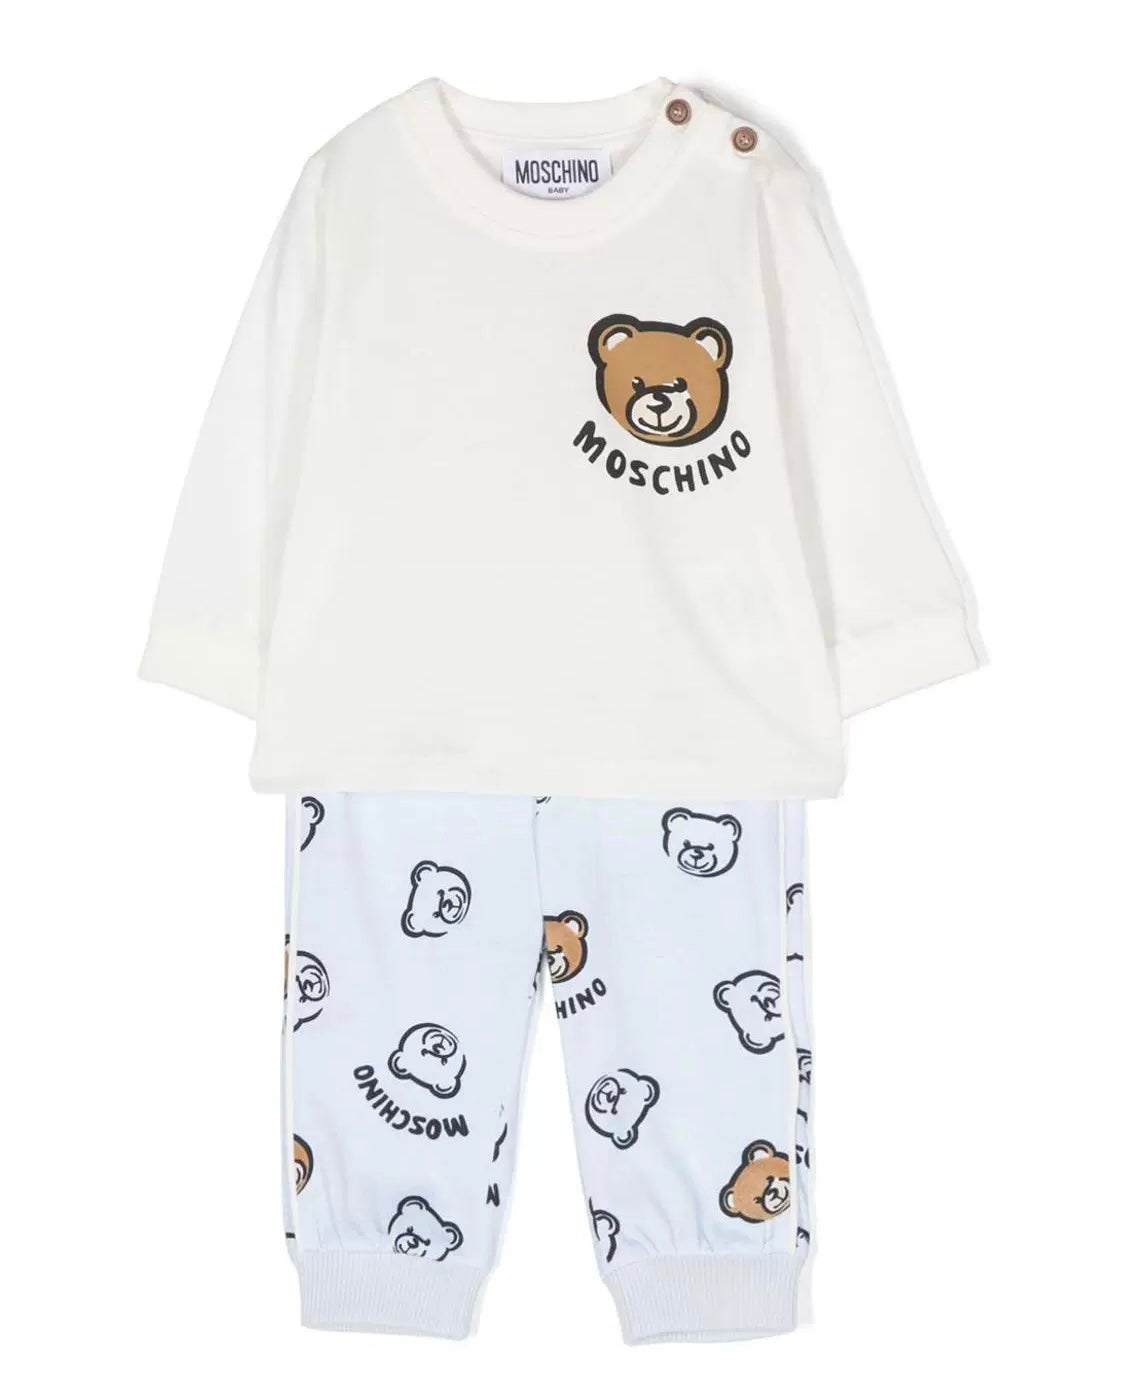 LS TOP AND PANT SET WITH BEAR DETAILS IN BOX - BLUE